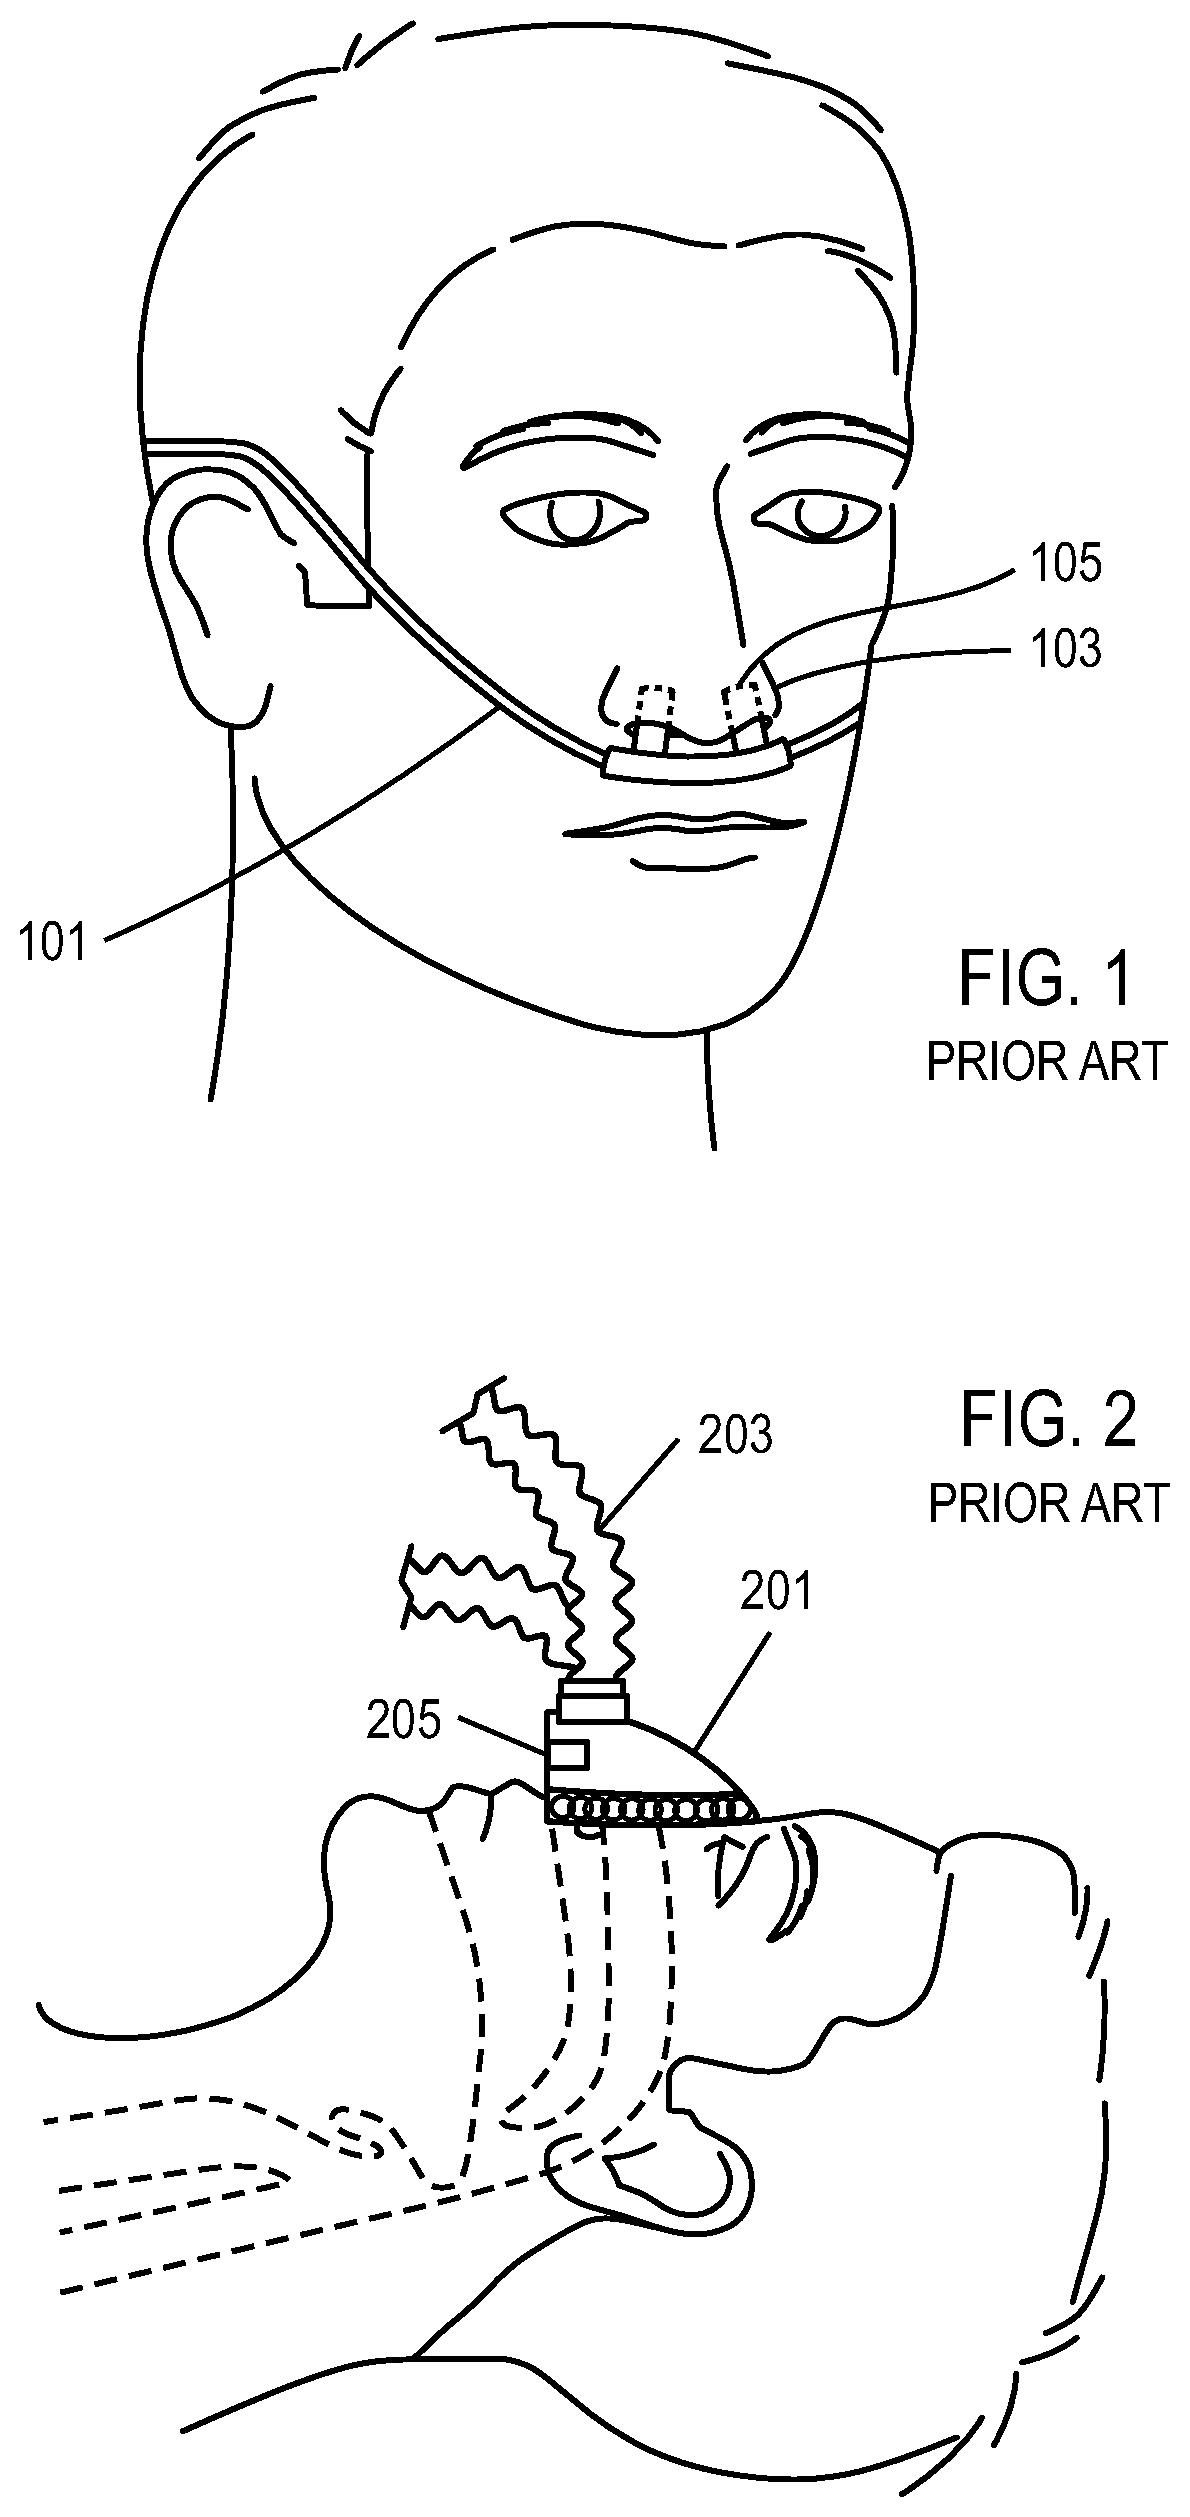 Methods, systems and devices for non-invasive ventilation including a non-sealing ventilation interface with an entrainment port and/or pressure feature